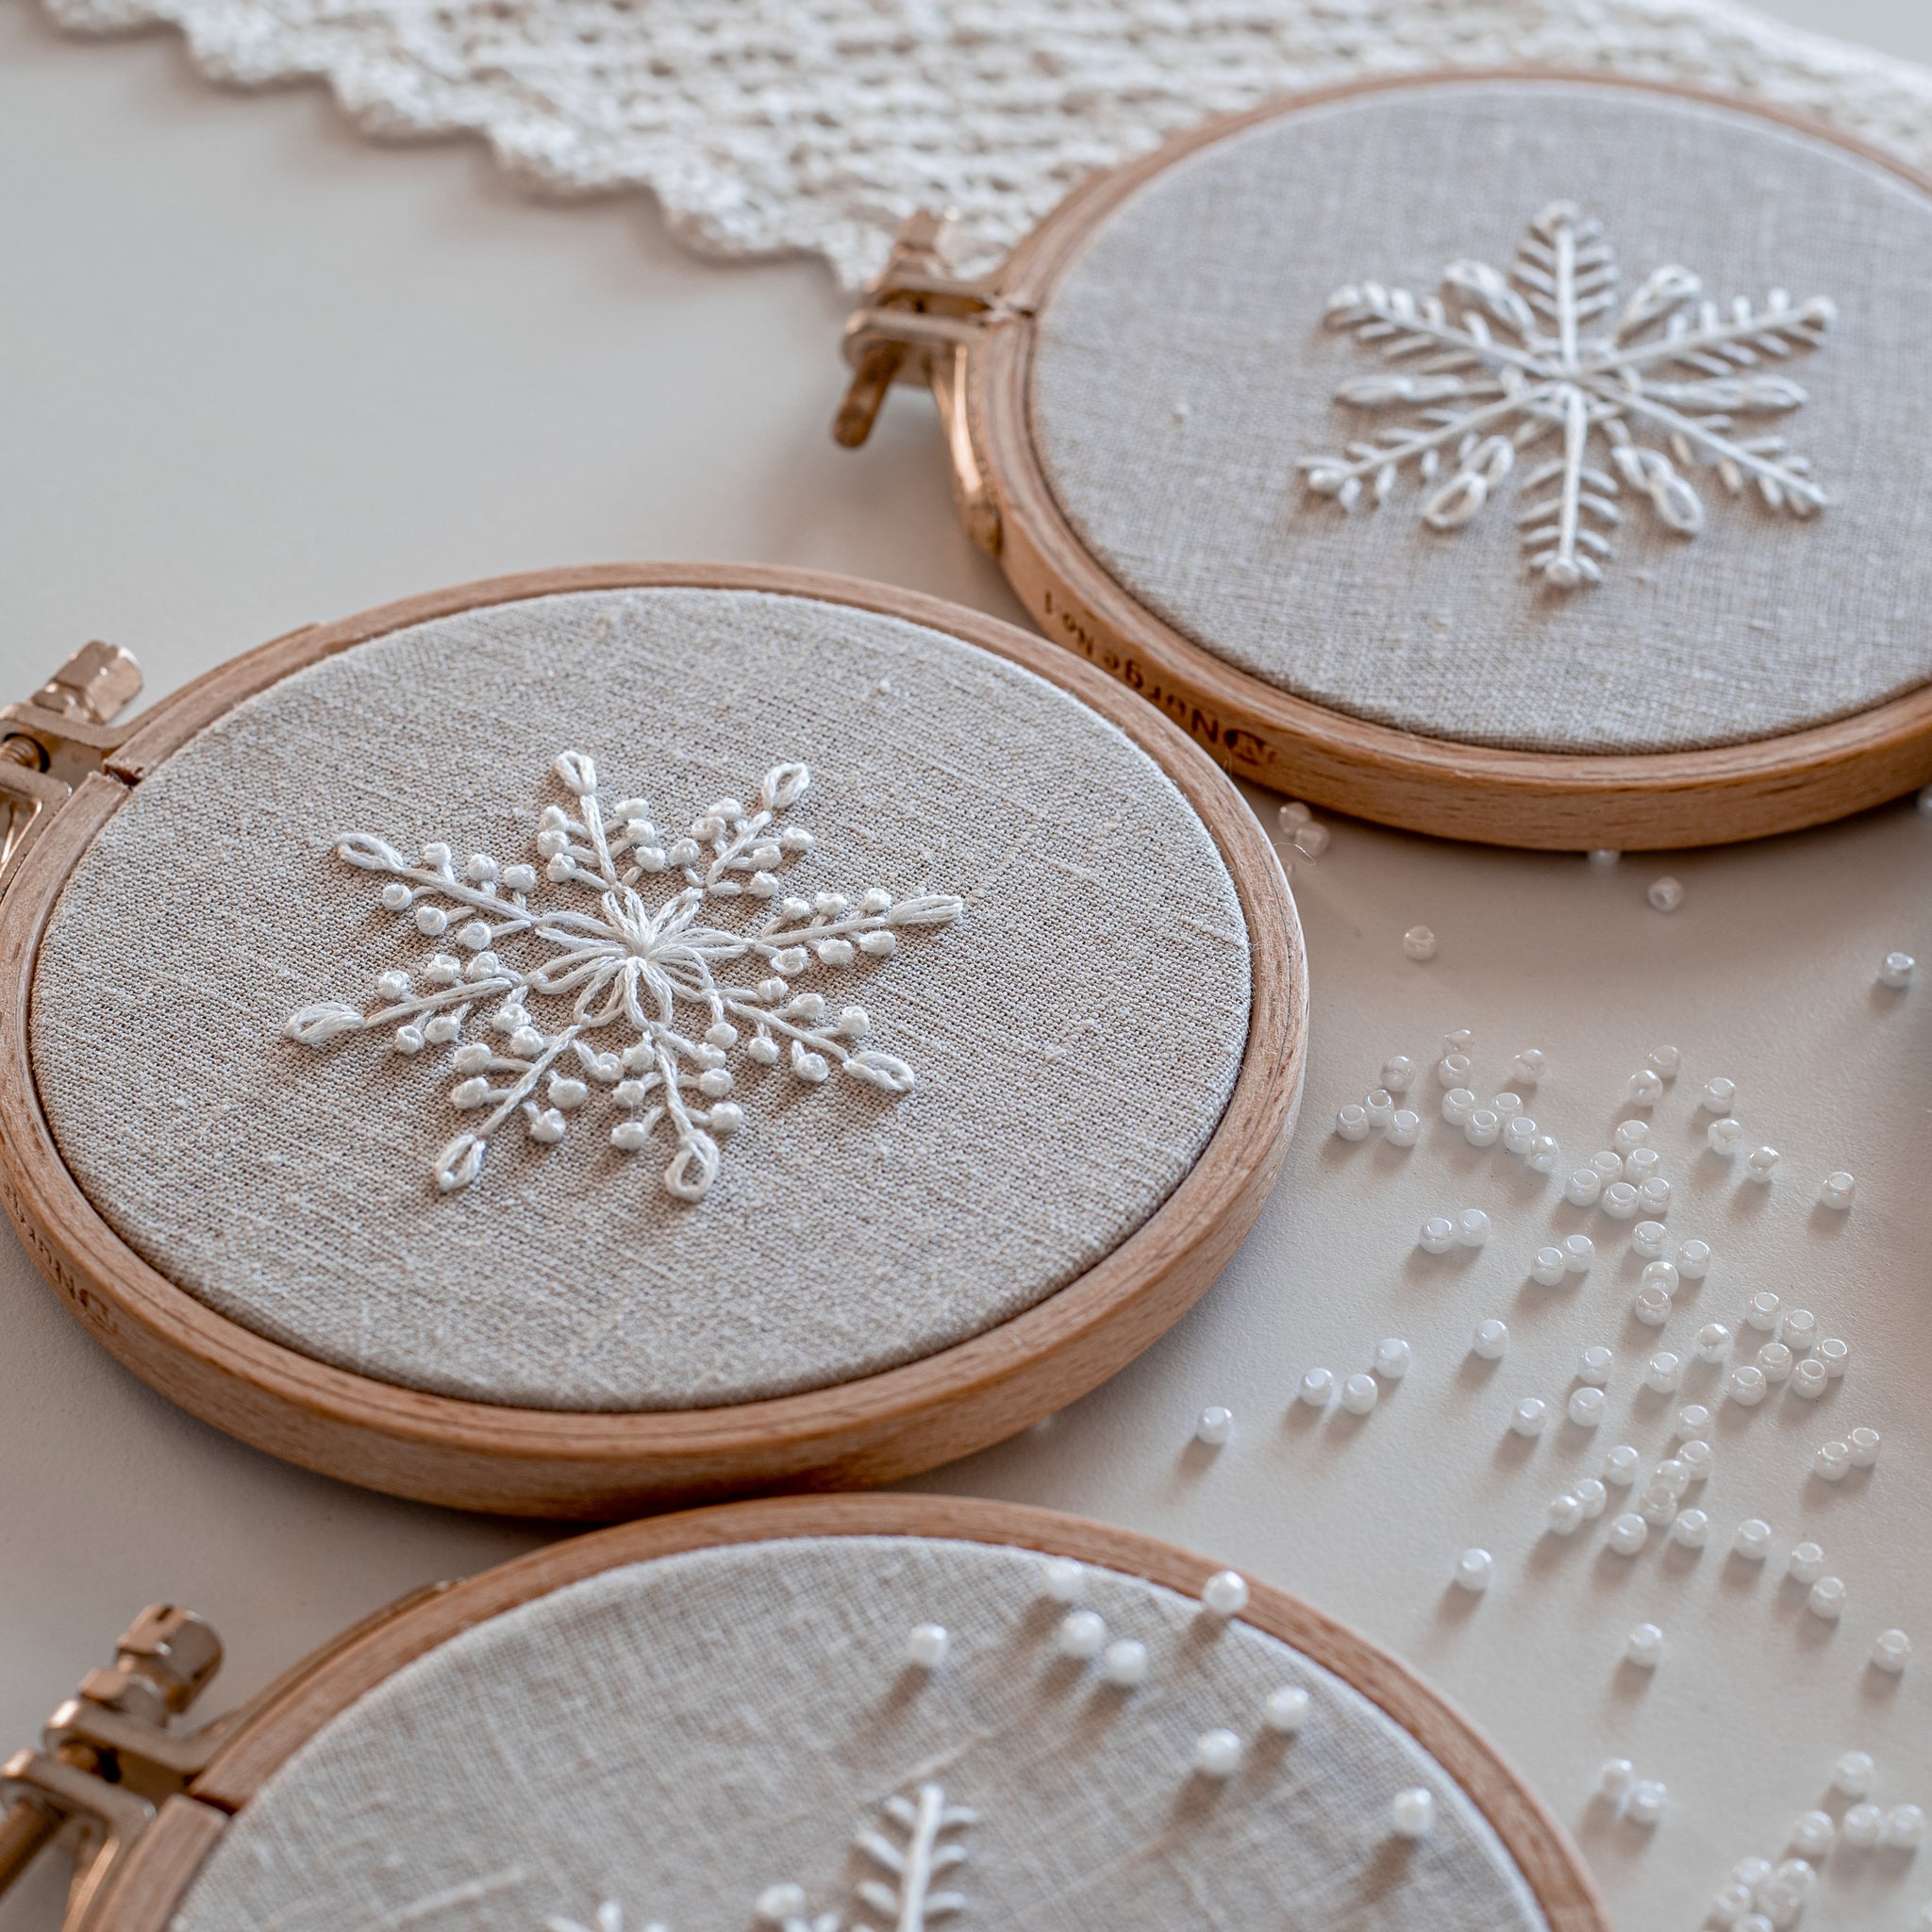 Mini Snowflake Stick & Stitch Embroidery Patterns — Olmsted